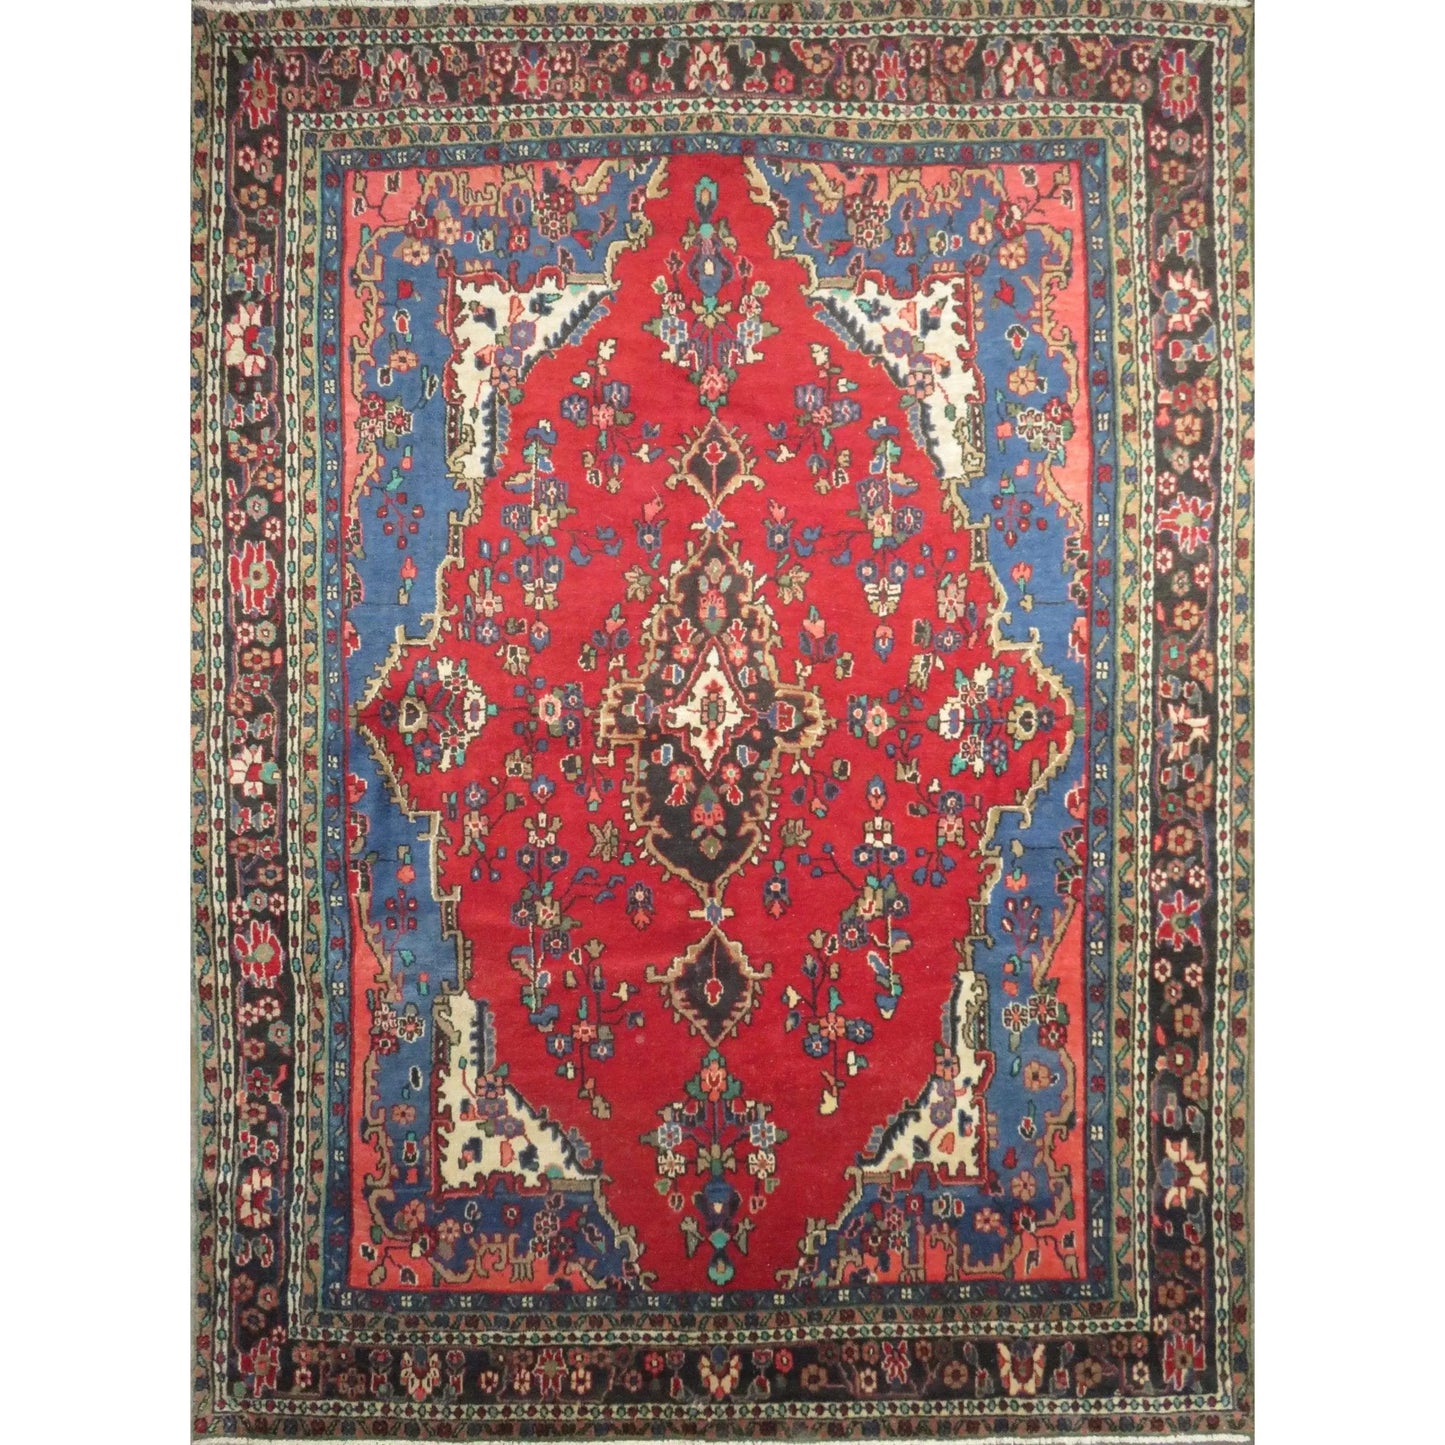 Hand-Knotted Vintage Rug 11'5" x 8'1"